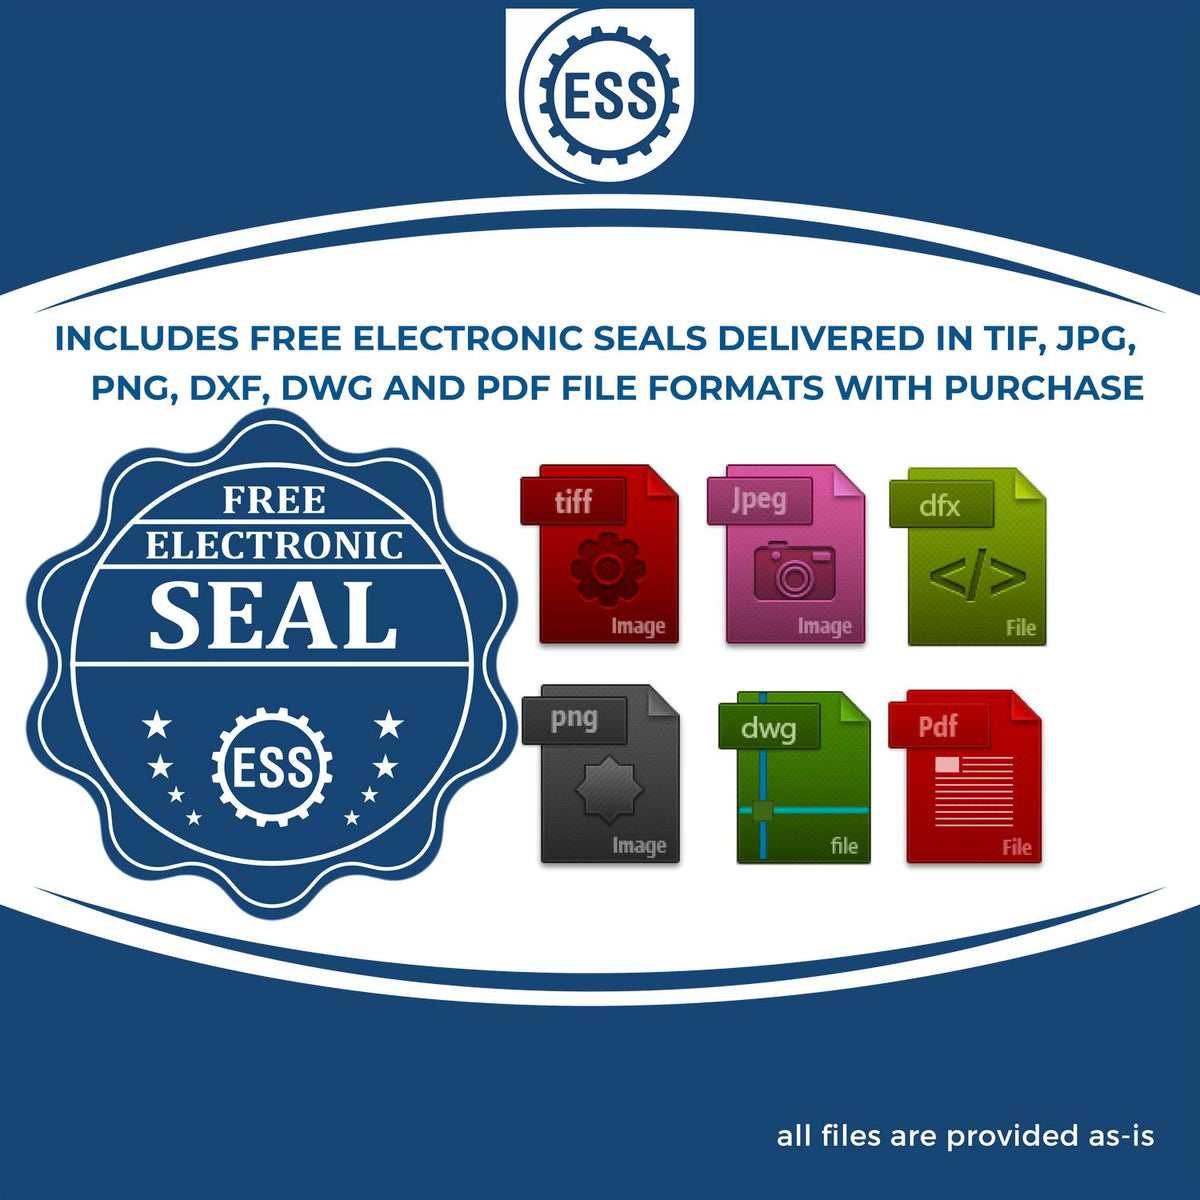 An infographic for the free electronic seal for the Self-Inking Alabama PE Stamp illustrating the different file type icons such as DXF, DWG, TIF, JPG and PNG.